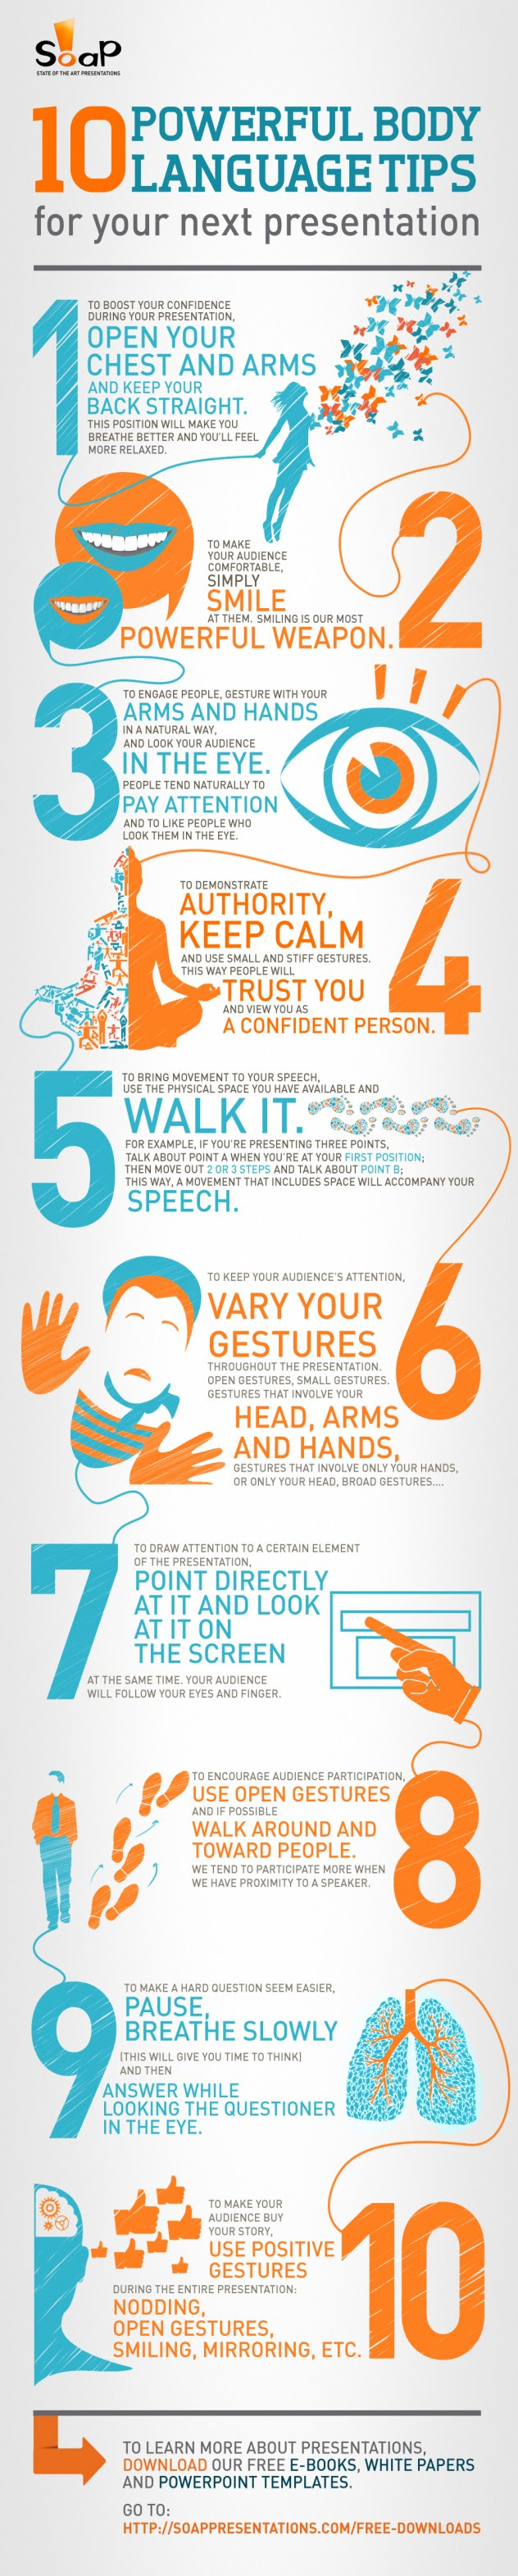 Body Language Examples 10 Good Body Language Examples to Use in Presentations